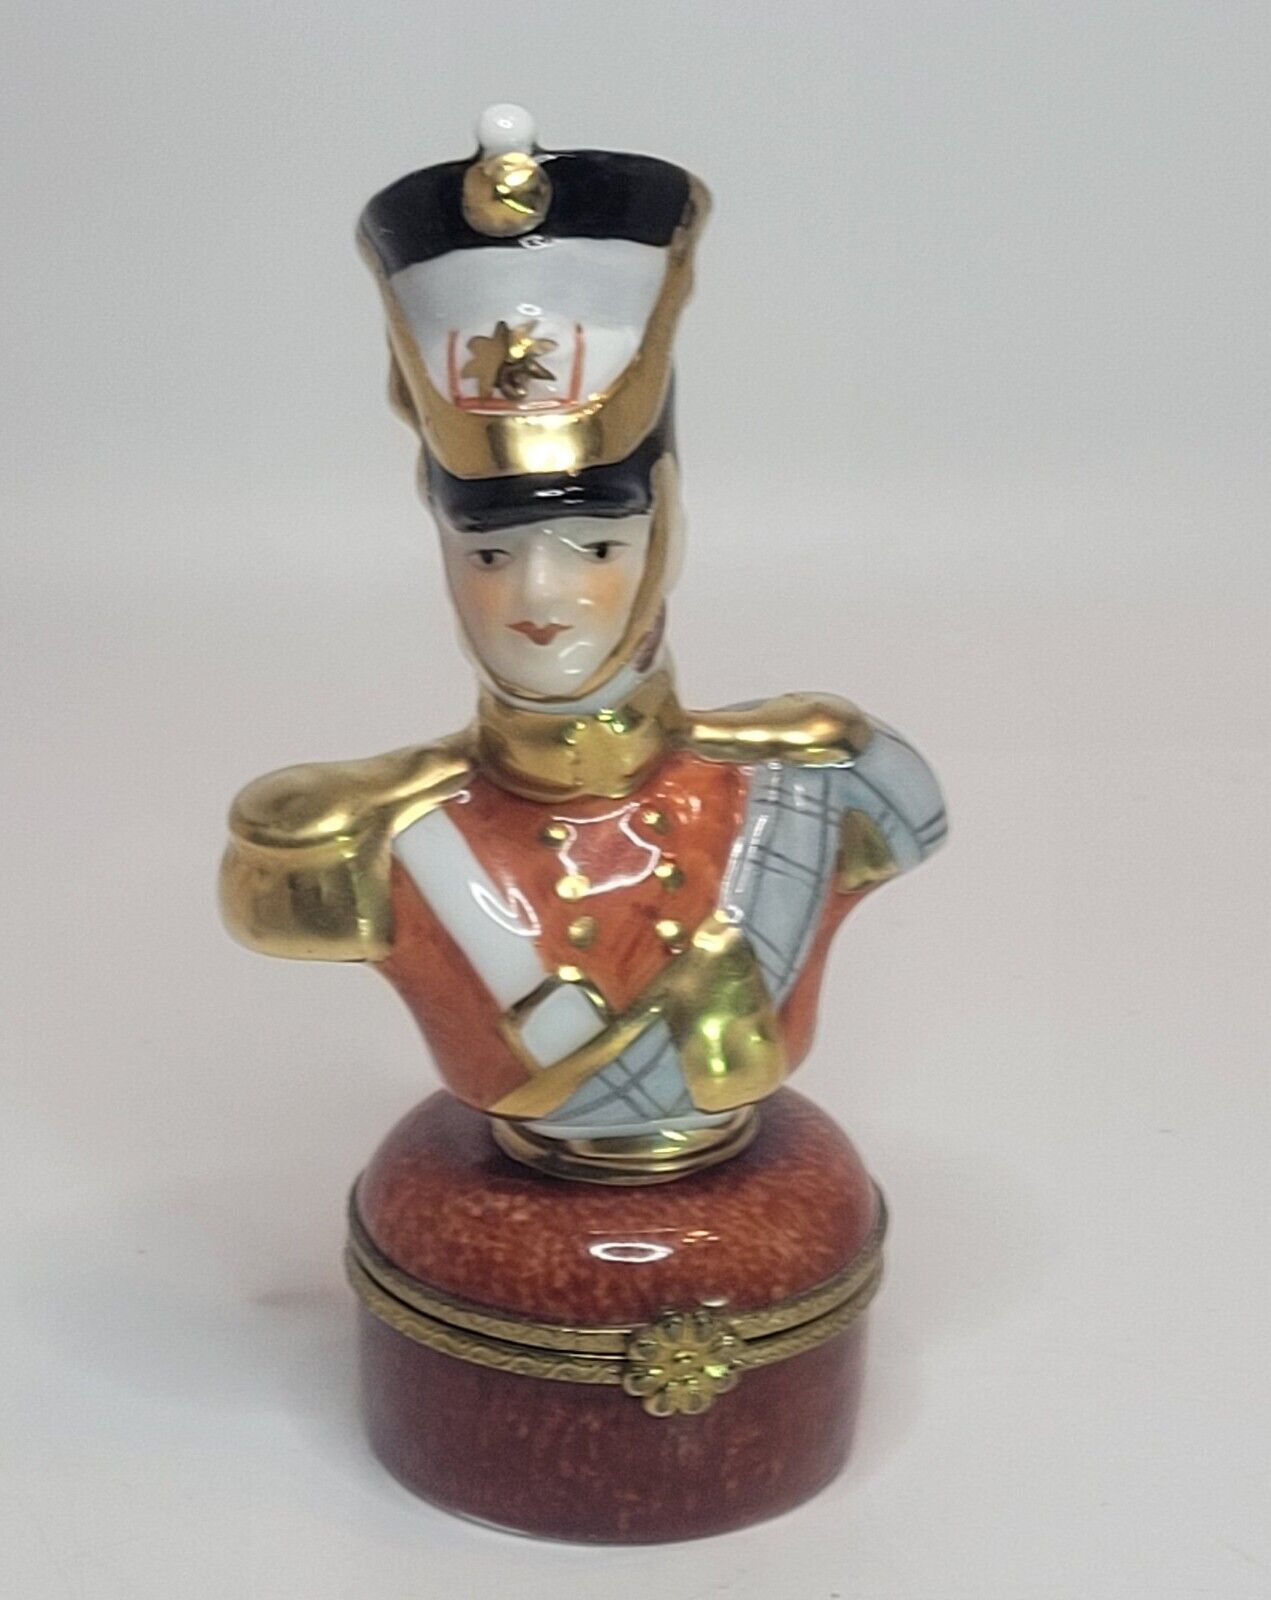 Limoges China French Soldier Trinket Box Bust Gold Accents Cabinet/Vanity Piece 